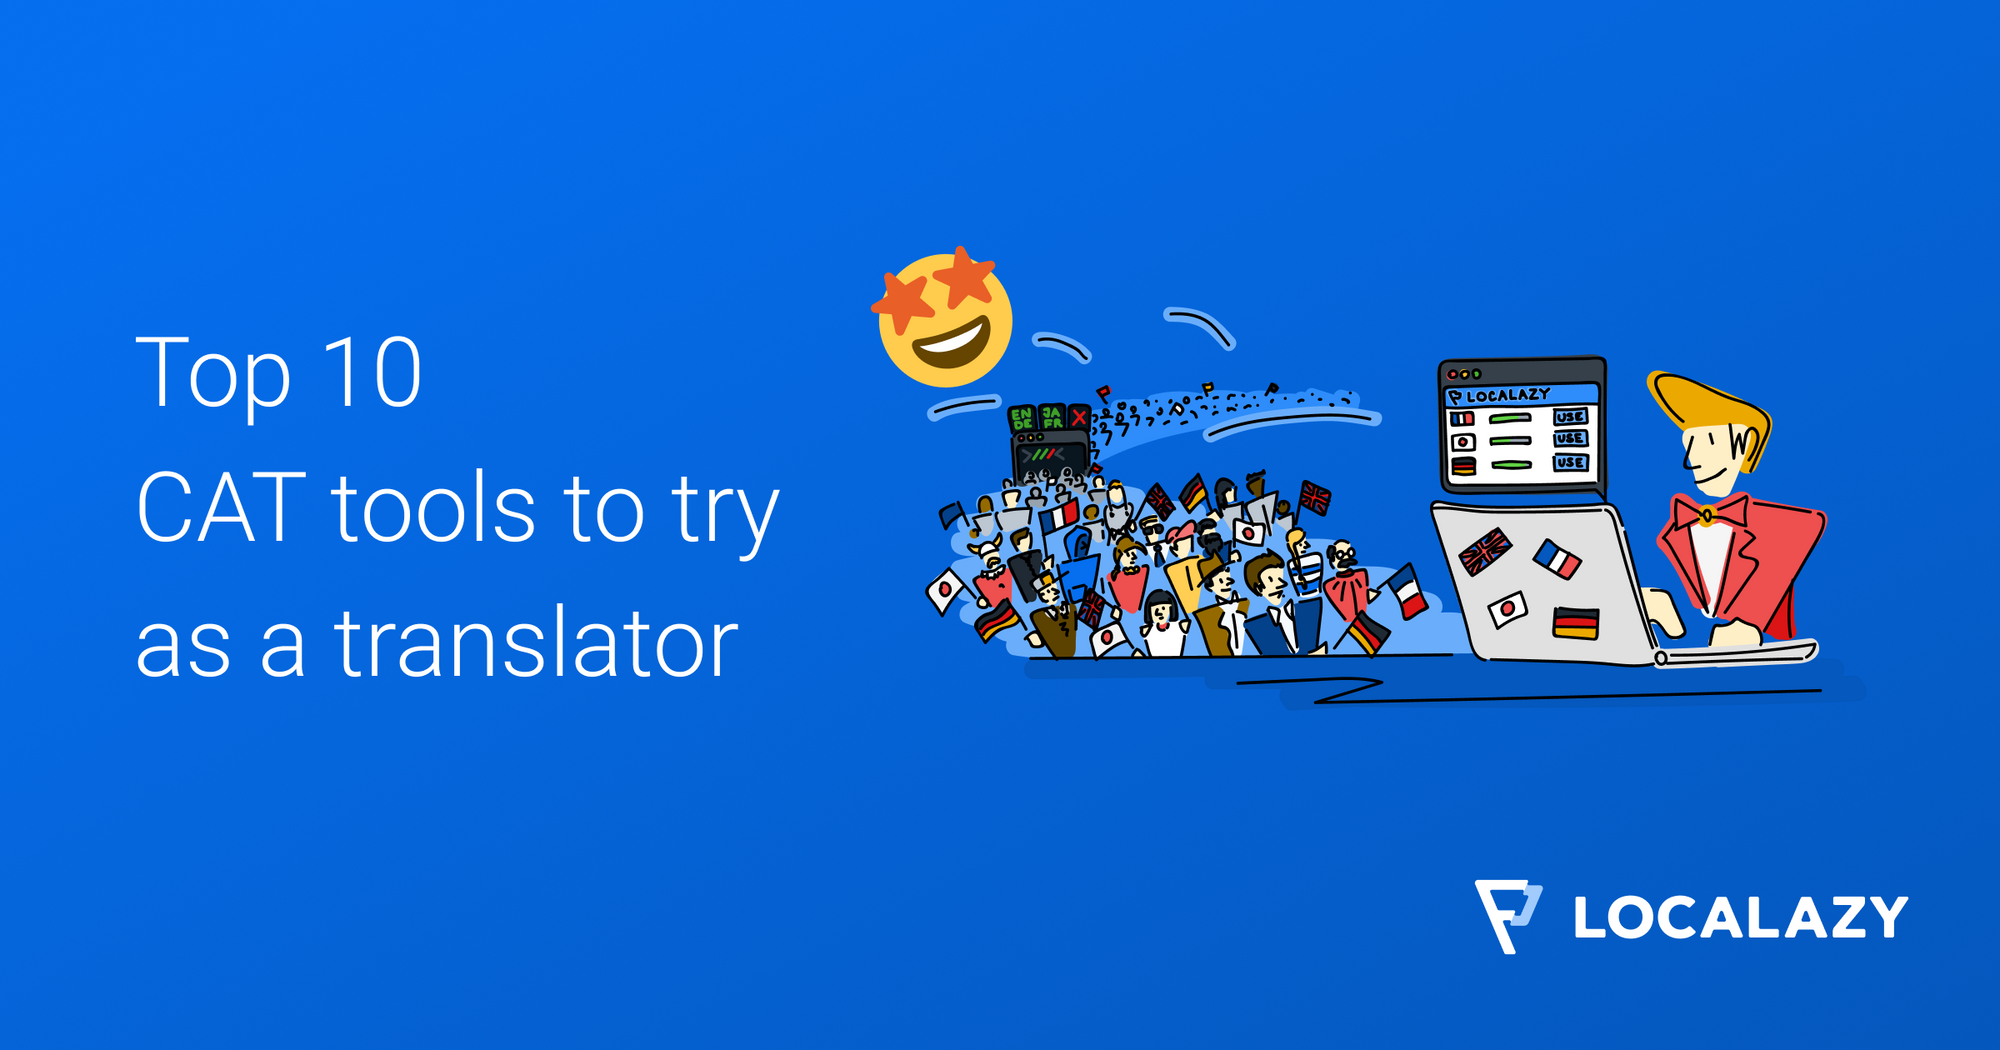 Top 10 CAT Tools to try in 2022 as a translator